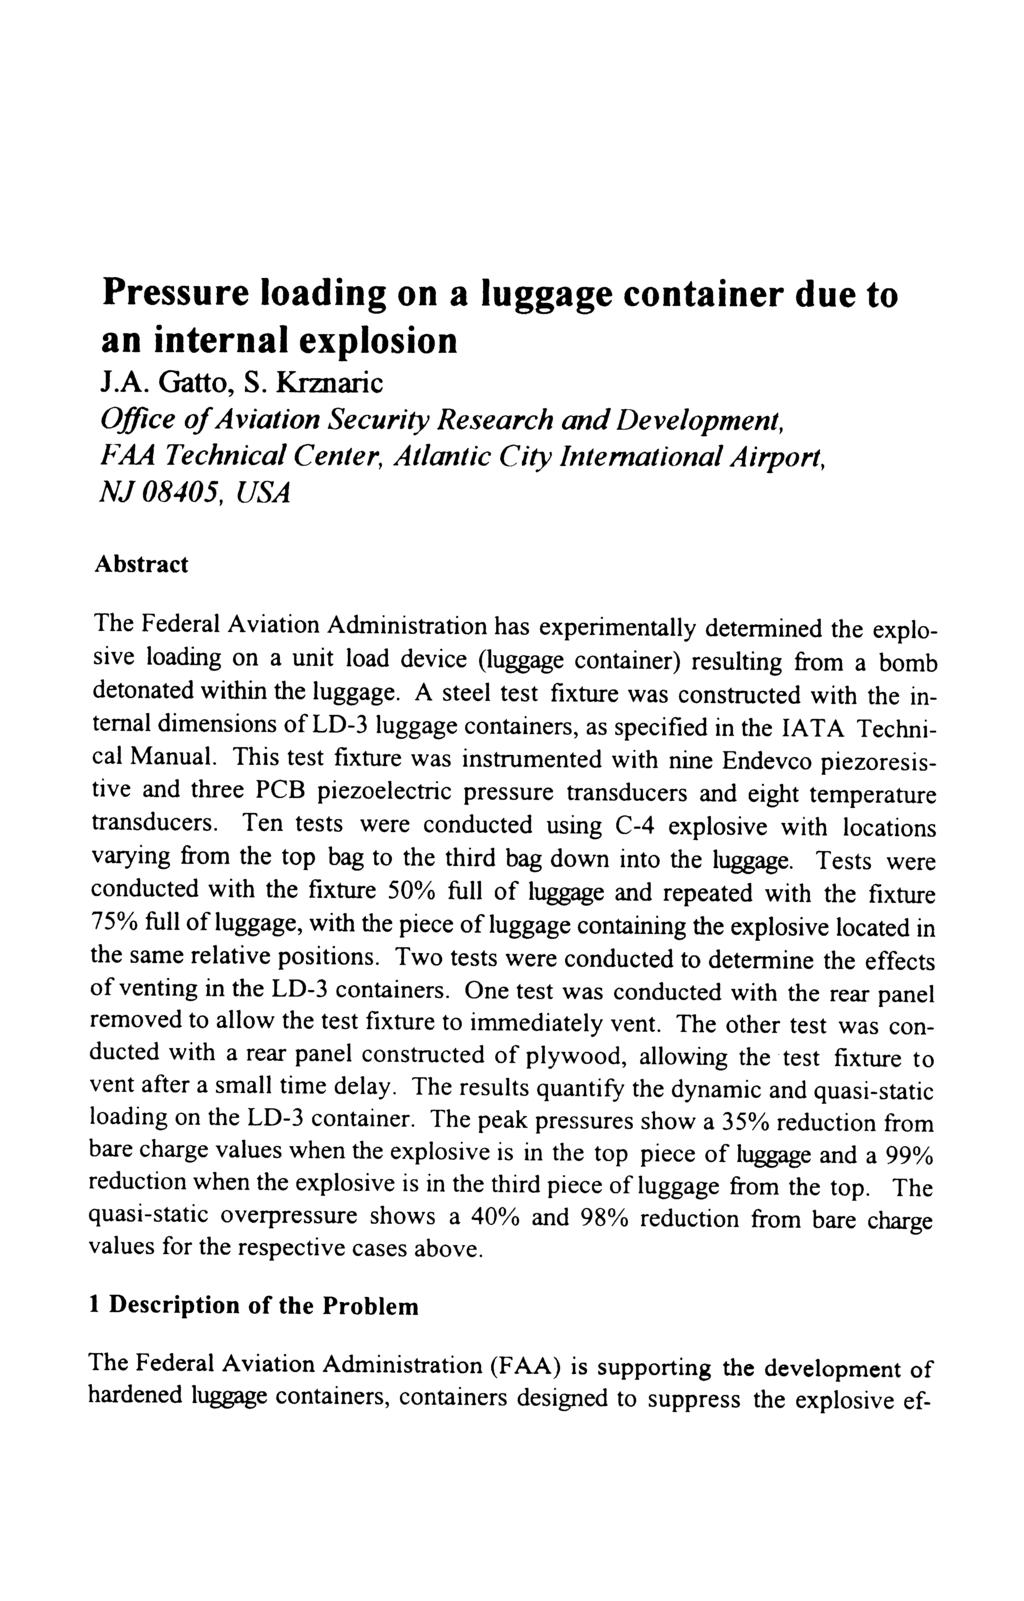 Pressure loading on a luggage container due to an internal explosion J.A. Gatto, S.